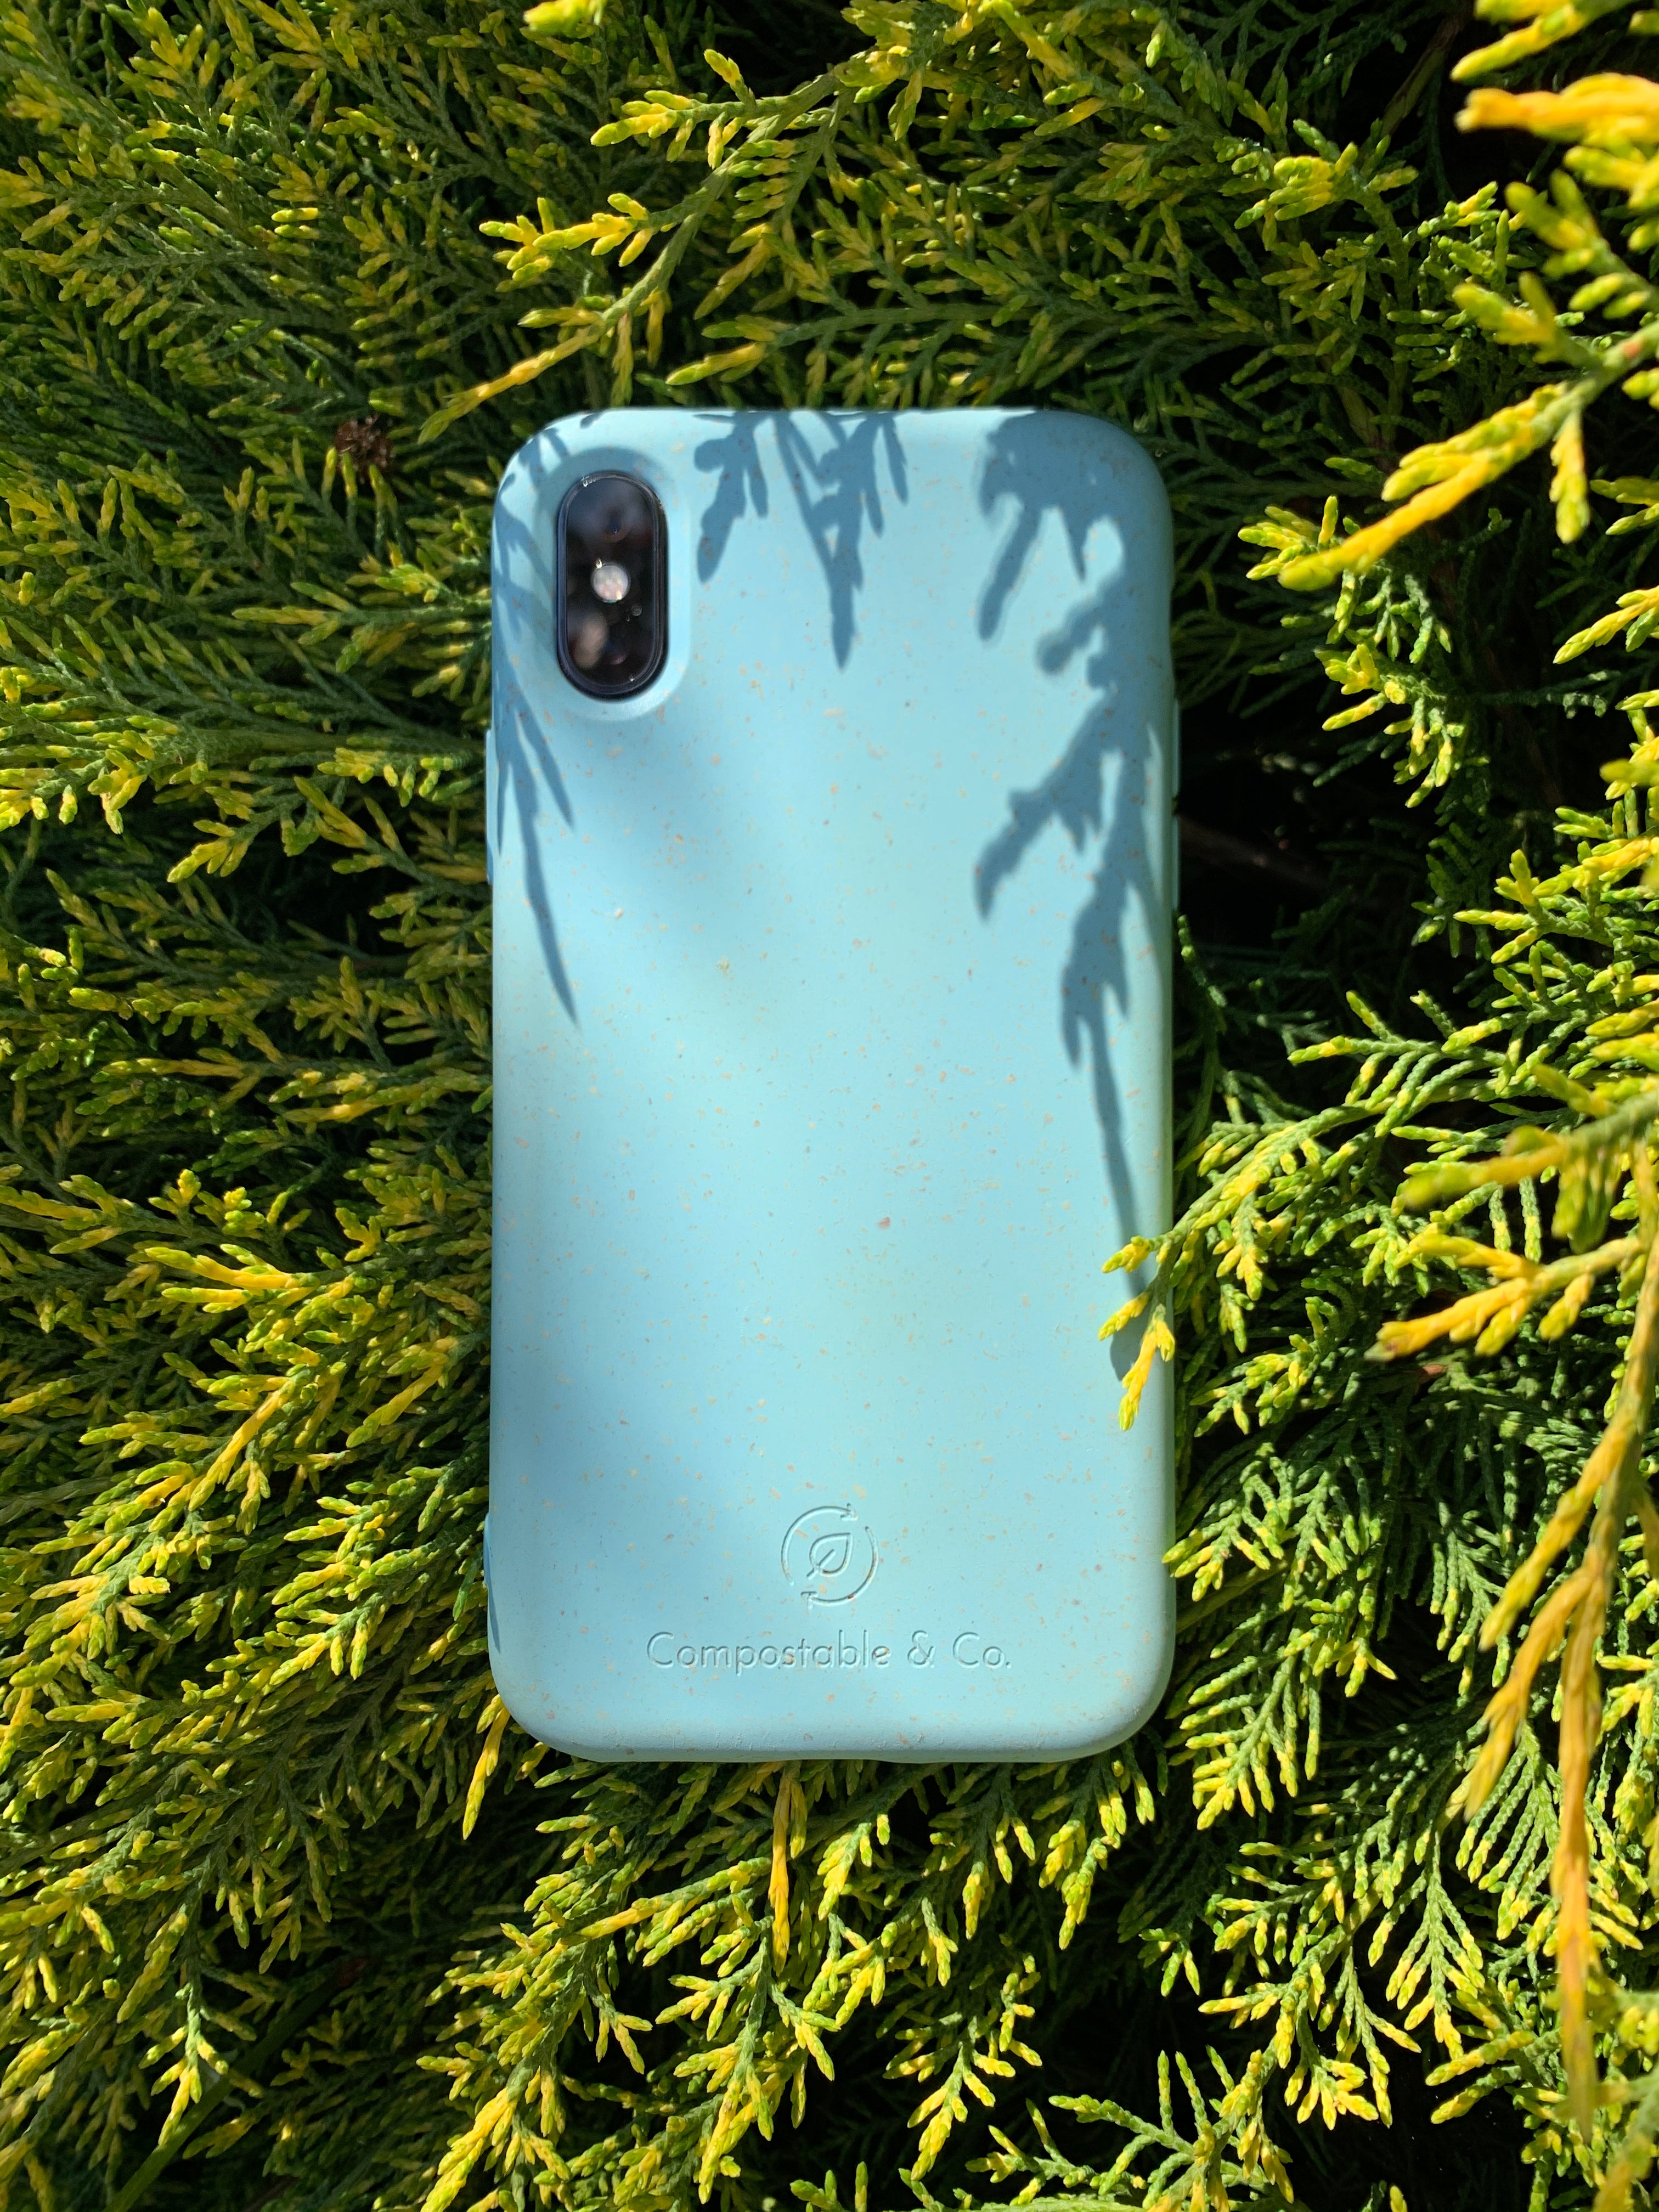 Compostable & Co. iPhone xr blue biodegradable phone case with natural background